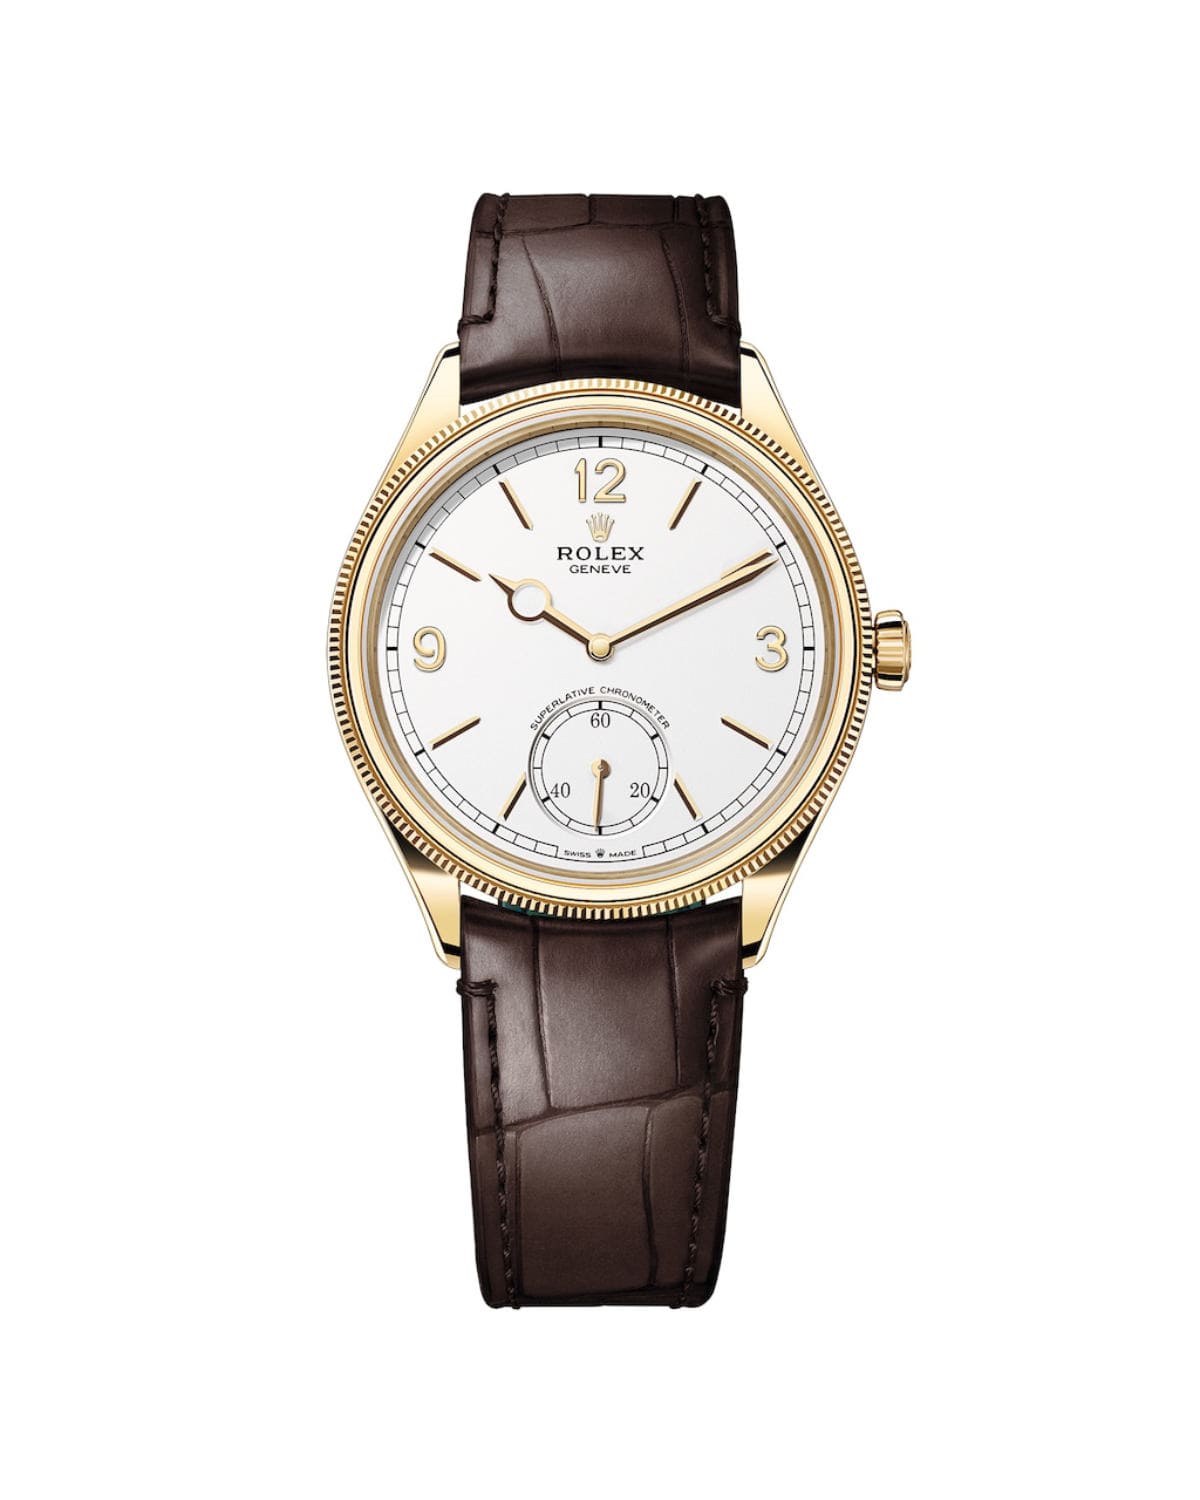 Perpetual 1908 watch, the pioneering piece in the Perpetual collection